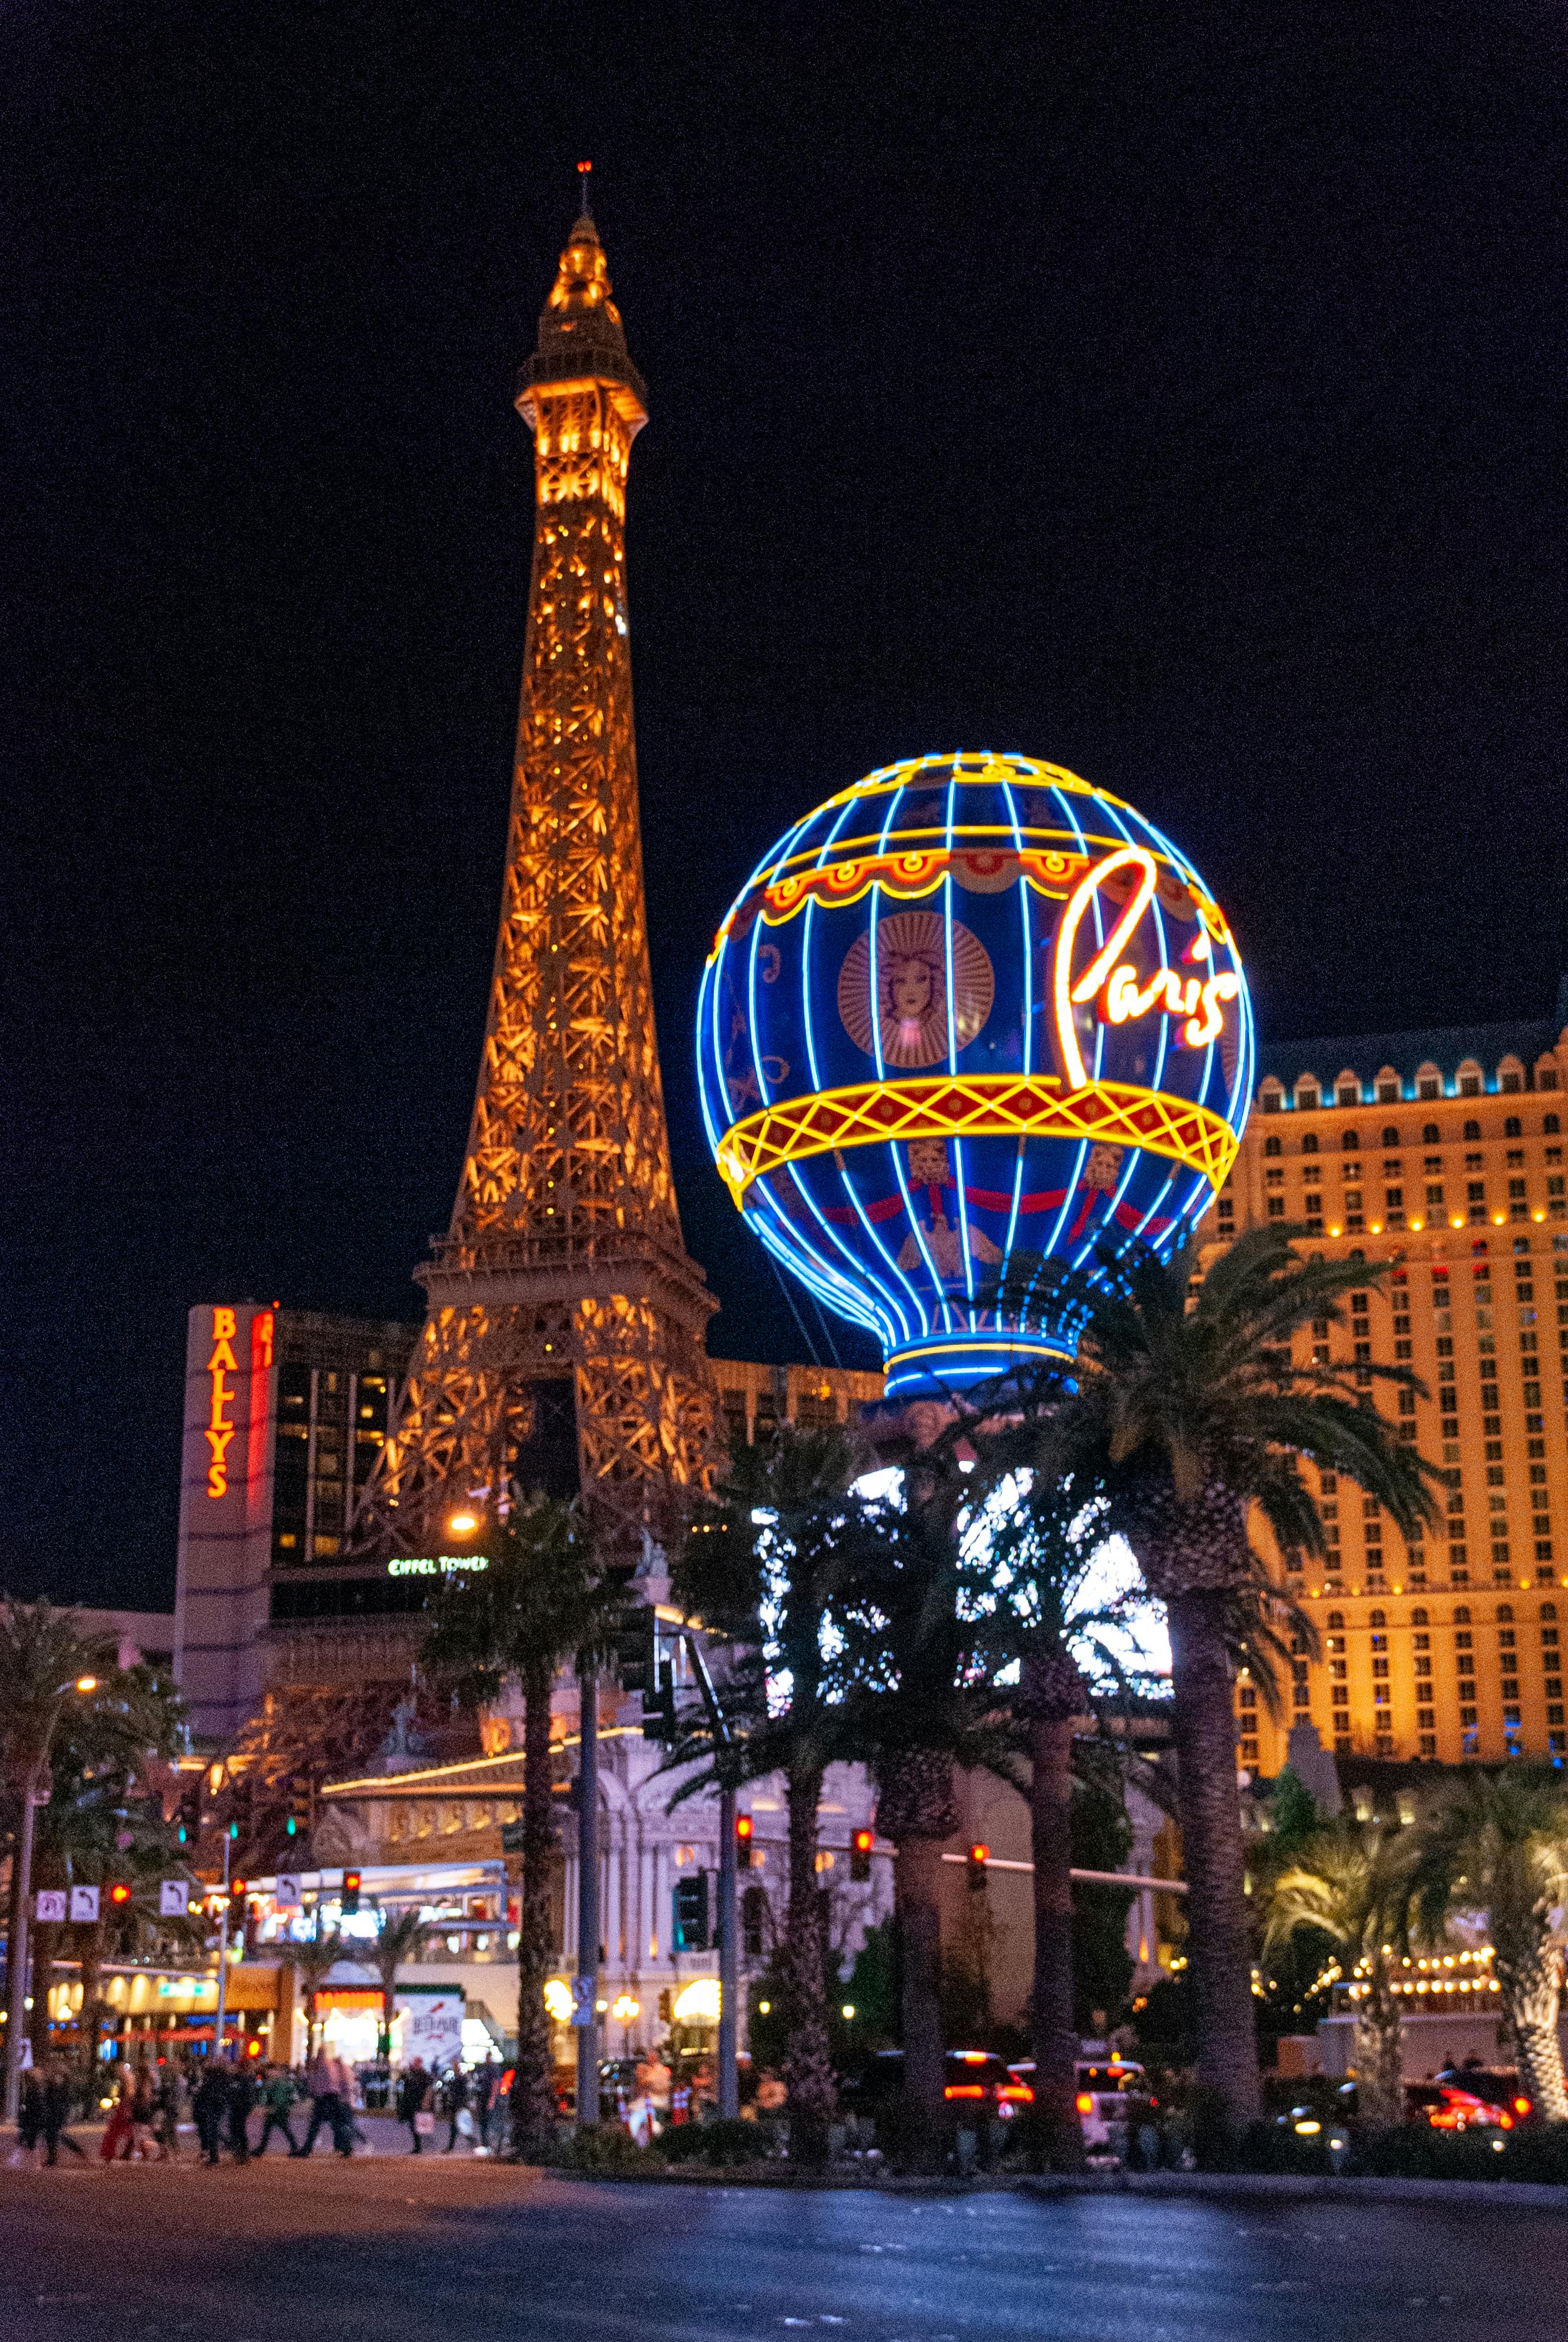 Ballys Hotel And Casino Lit Up At Night In Las Vegas Stock Photo - Download  Image Now - iStock